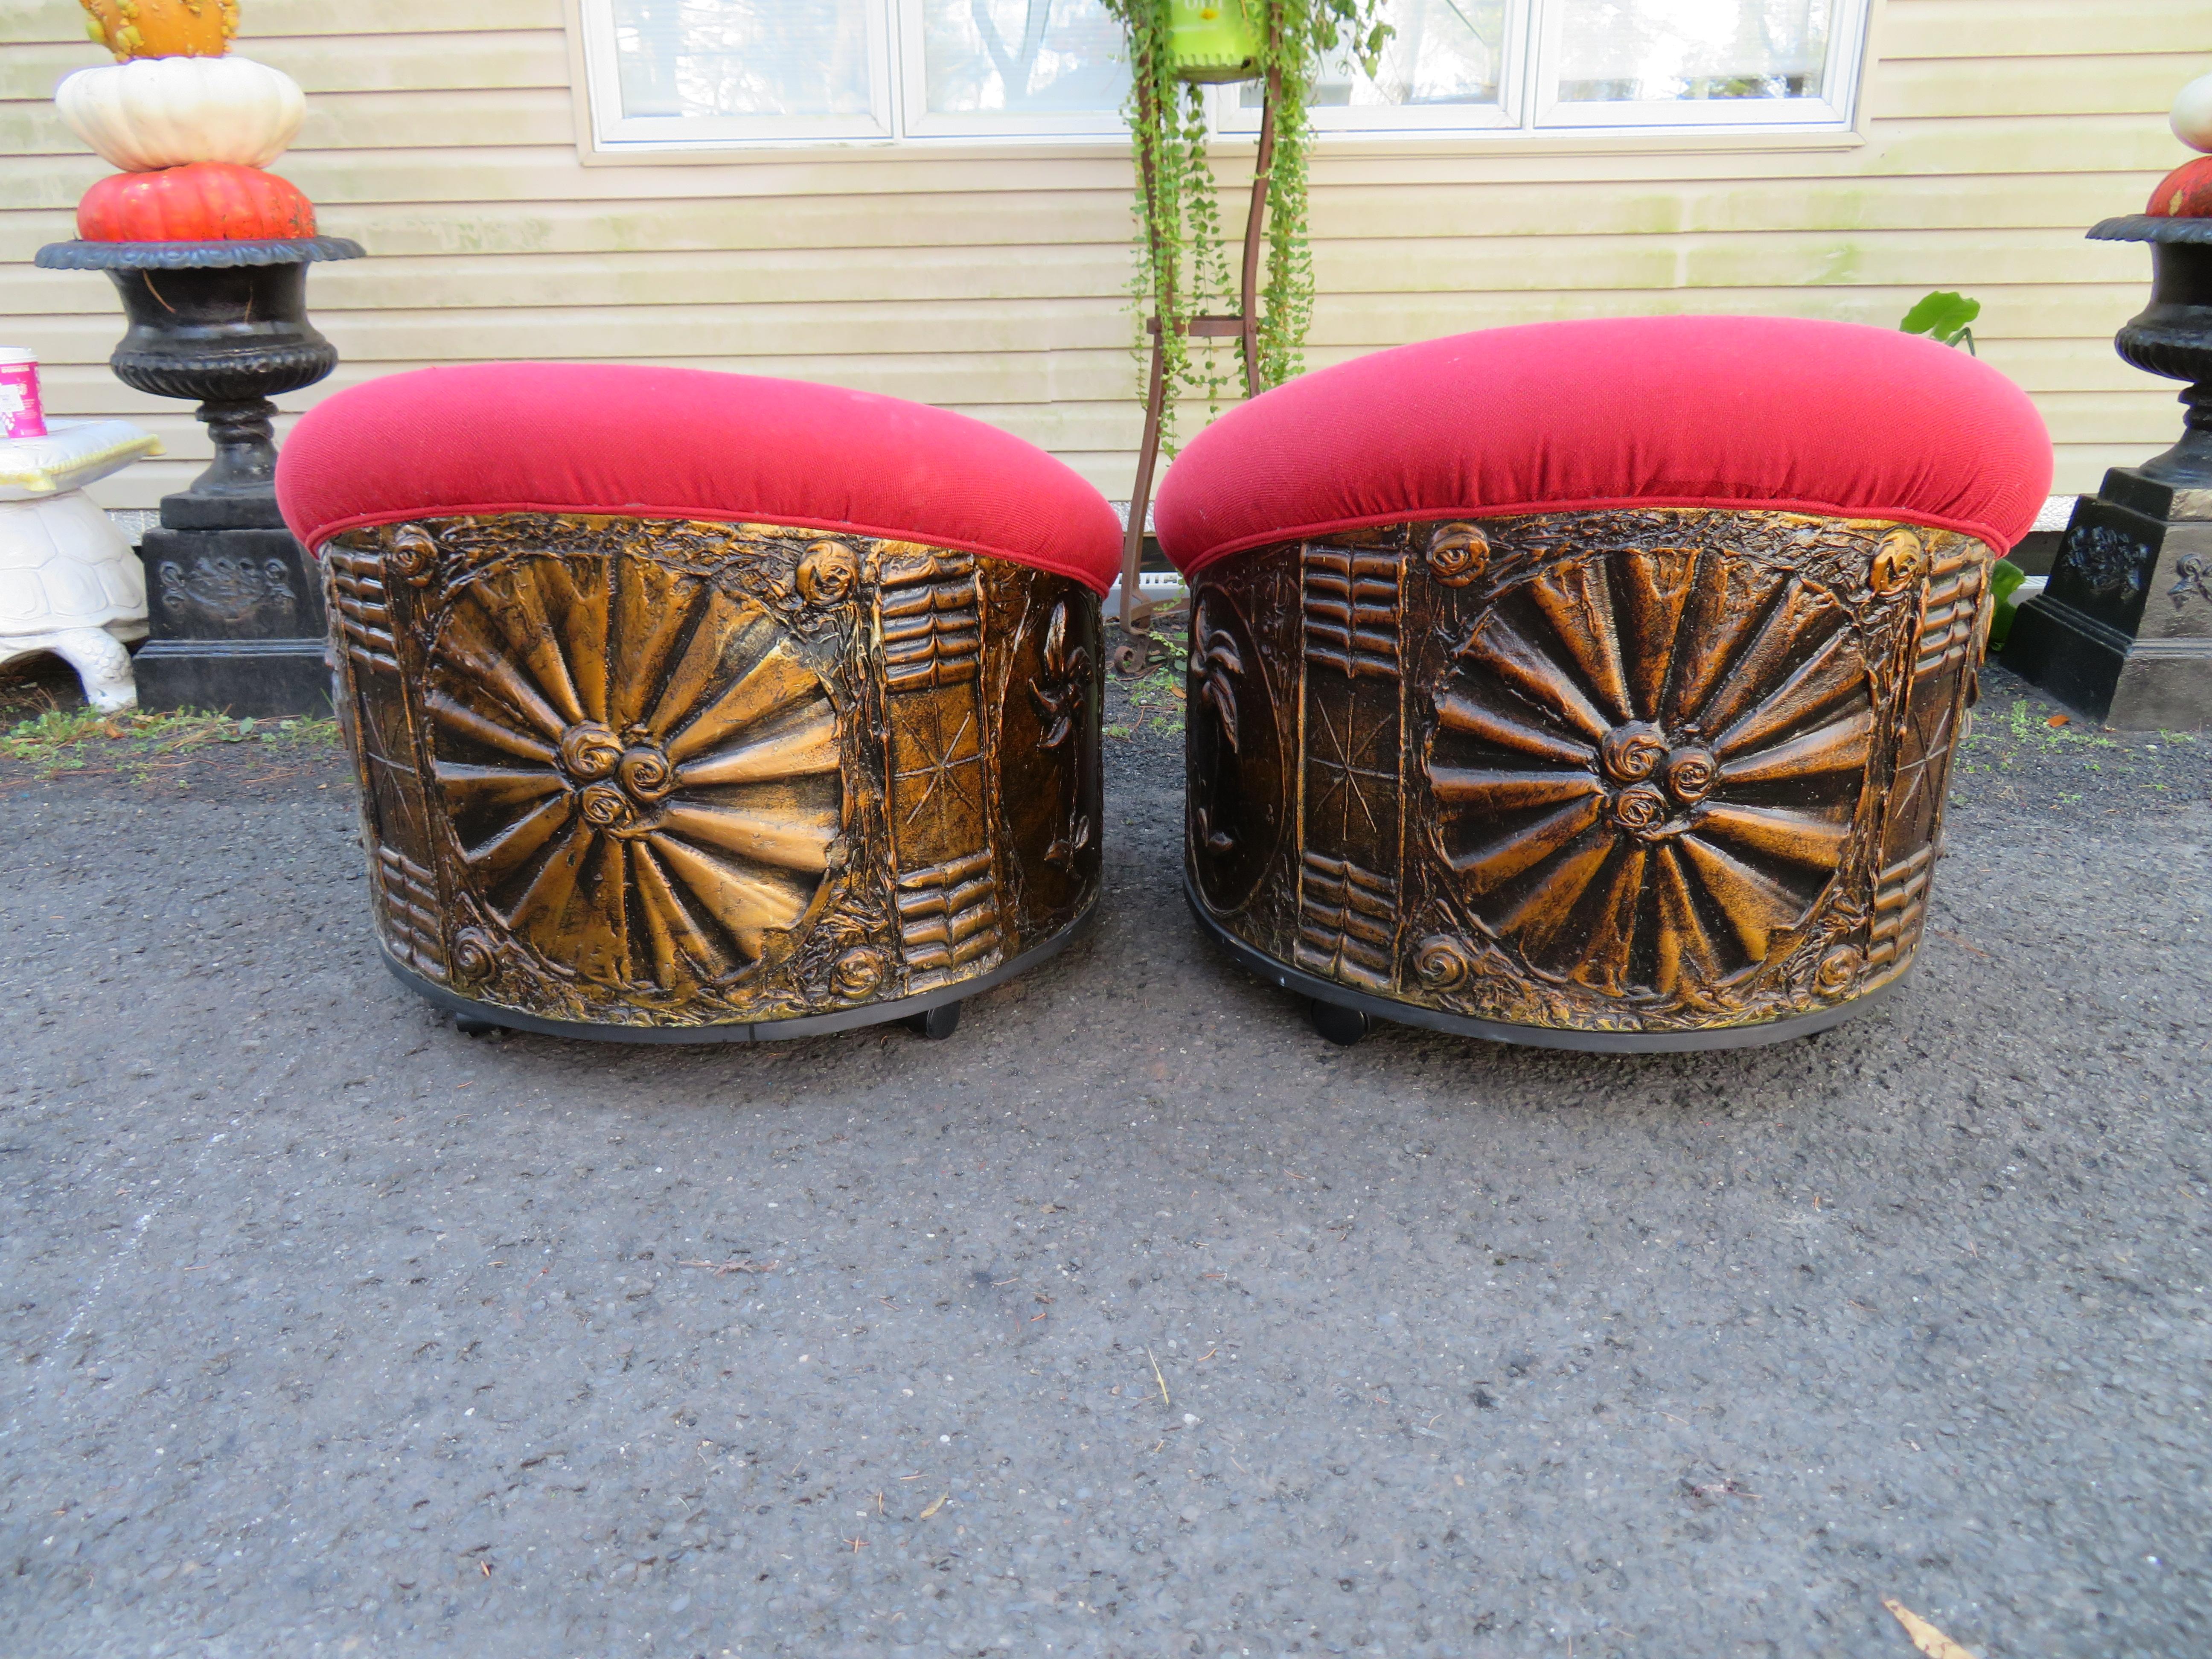 Magnificent Adrian Pearsall Brutalist Pod Lounge Chairs Mid-Century Modern, Pair For Sale 10